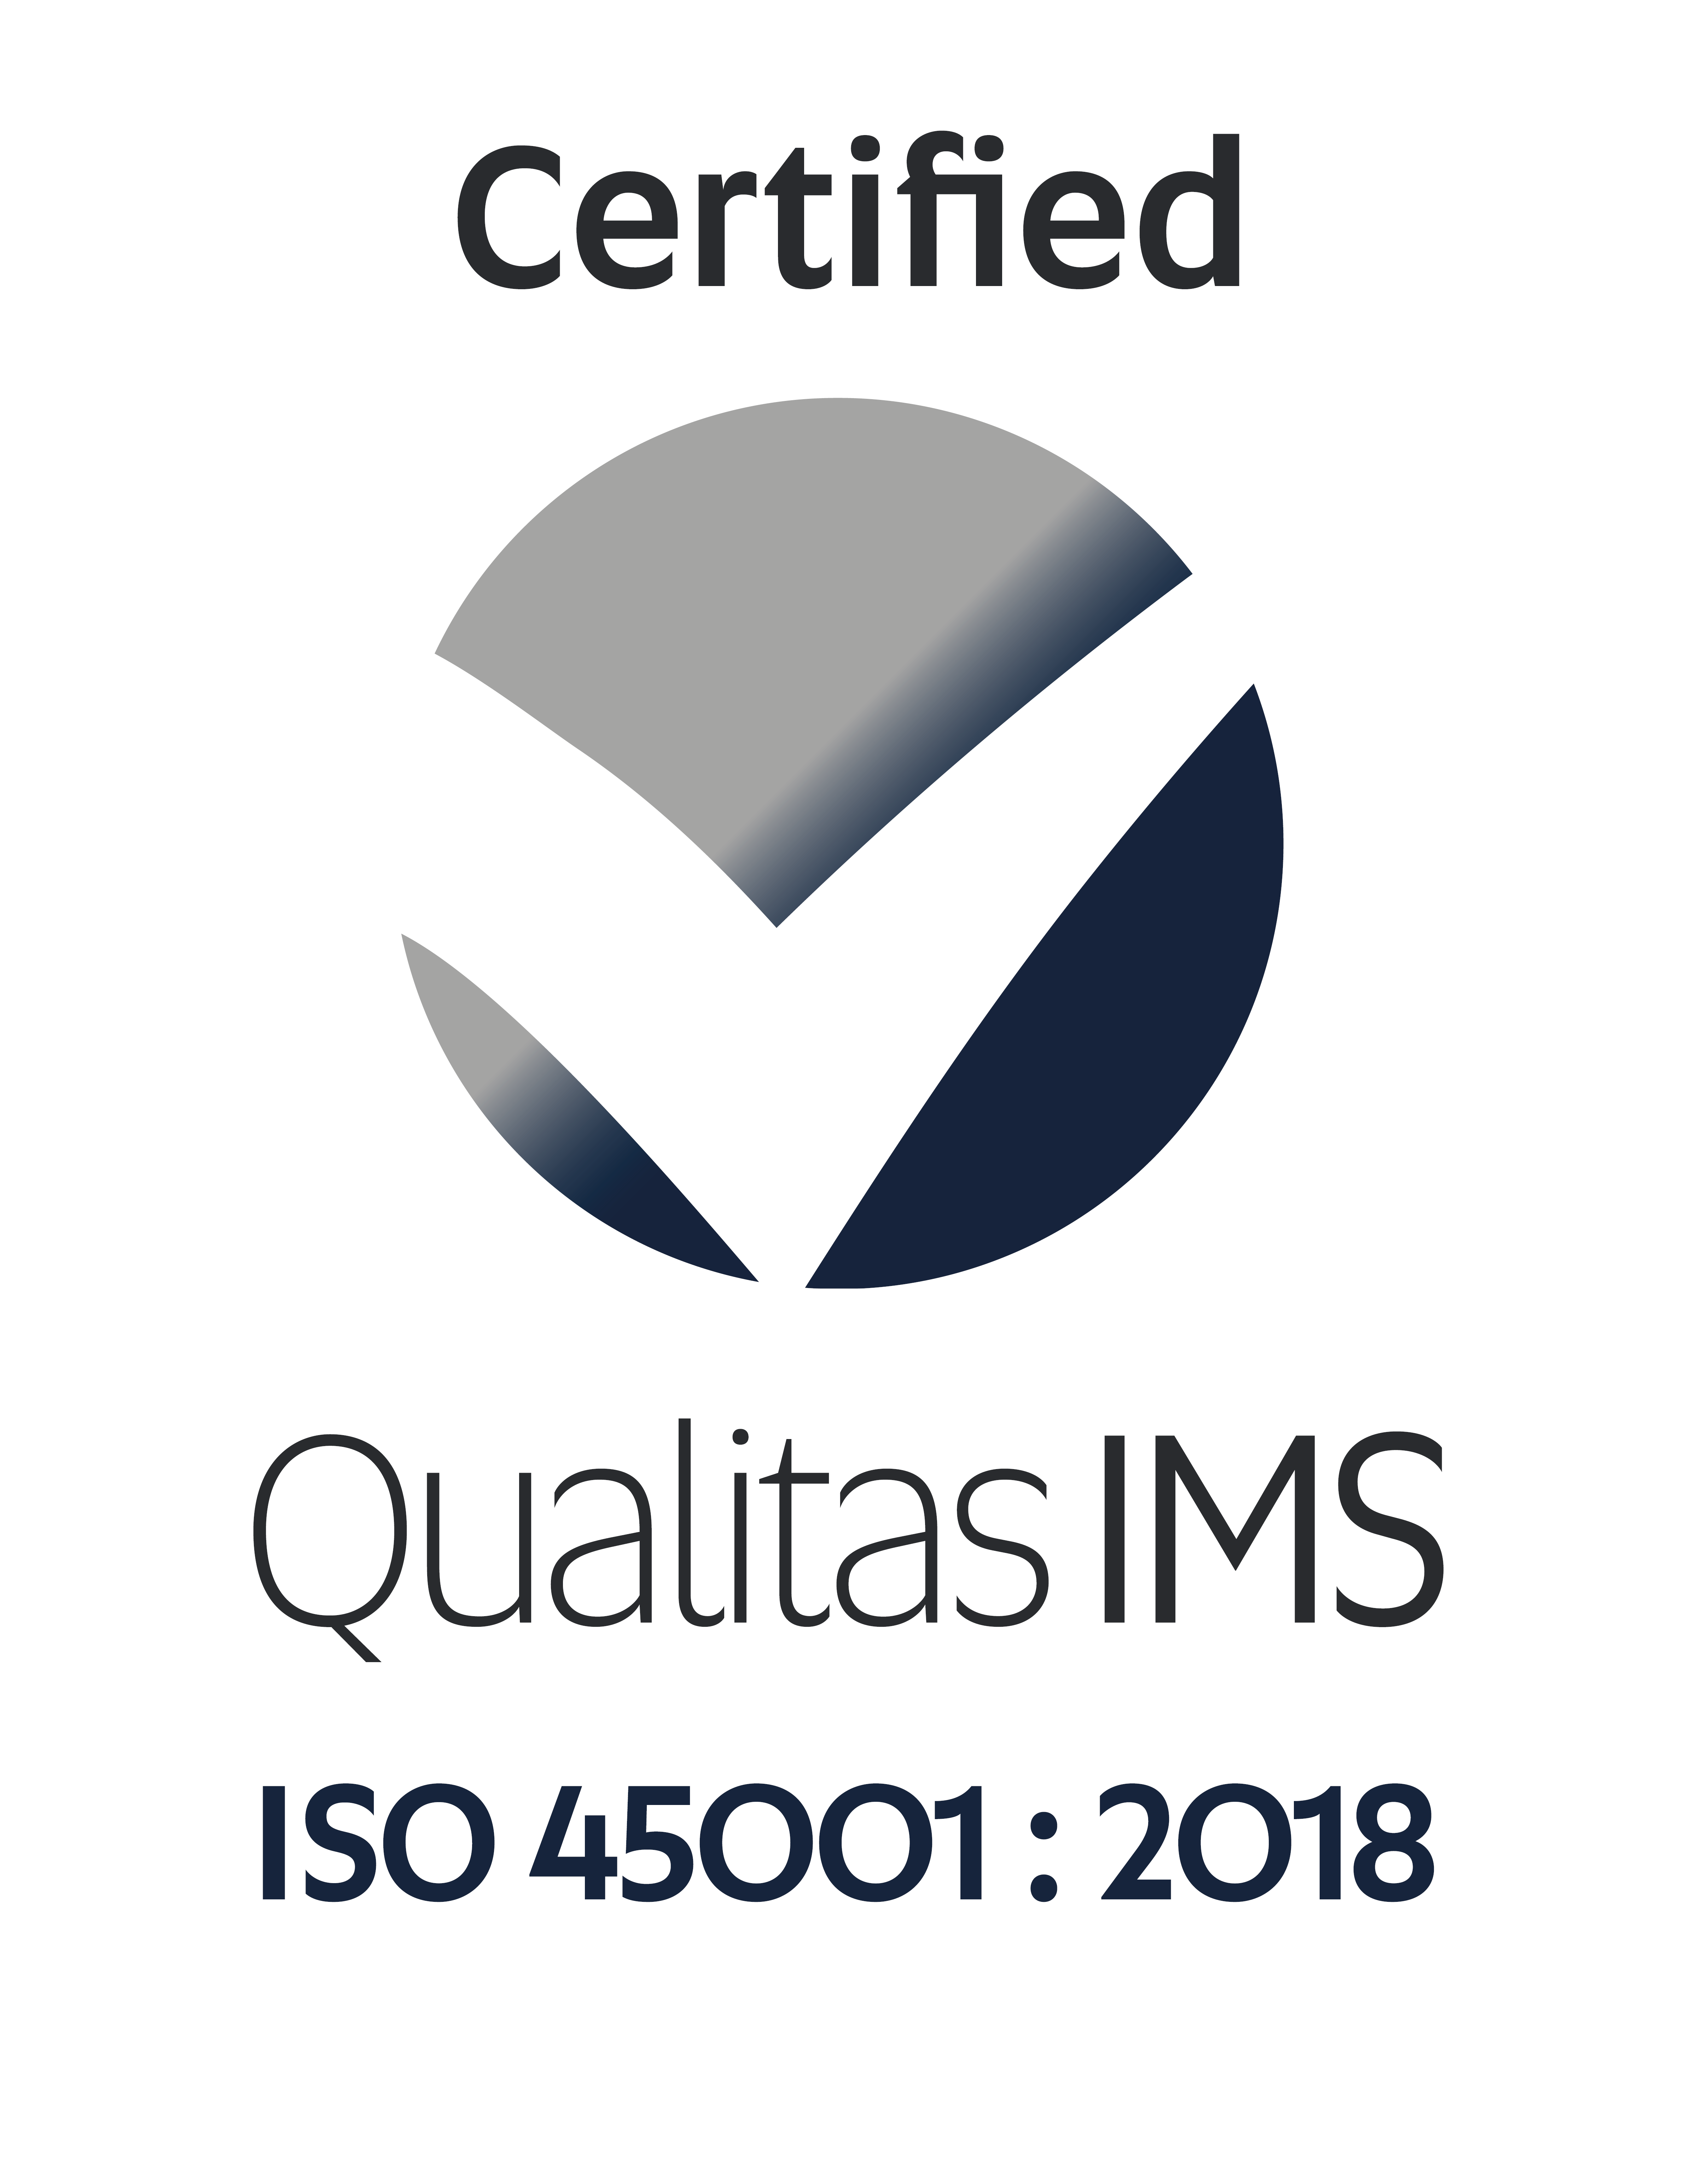 Certified Logo for ISO Accreditation with Qualitas IMS ISO 45001: 2015